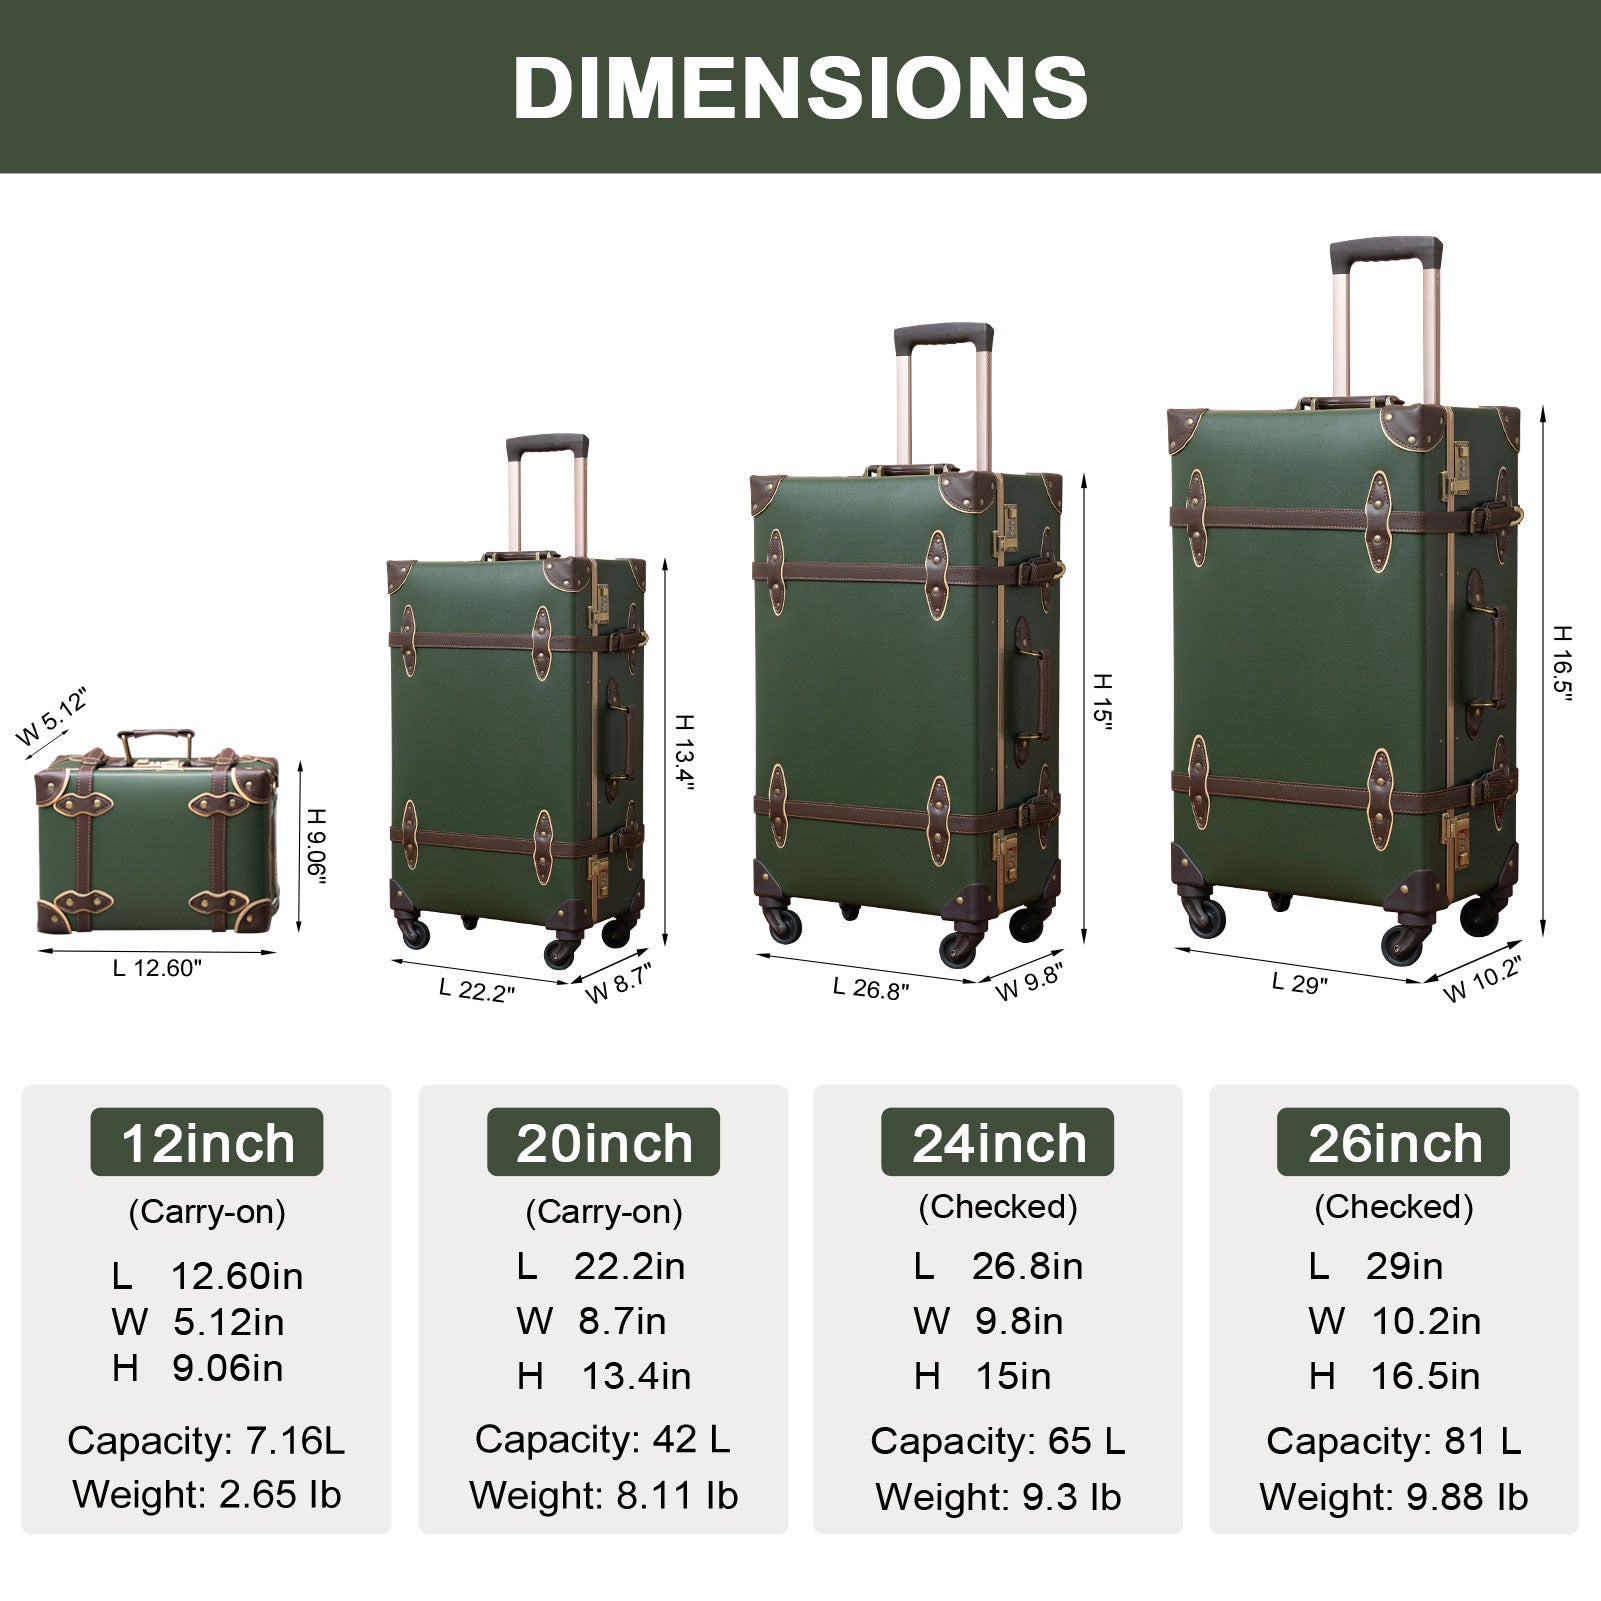 urecity Vintage Luggage Set, Trunk Style Suitcase with Wheels, 2-Piece  Hardside Luggage and Beauty Case Set (Army Green, 26+12)